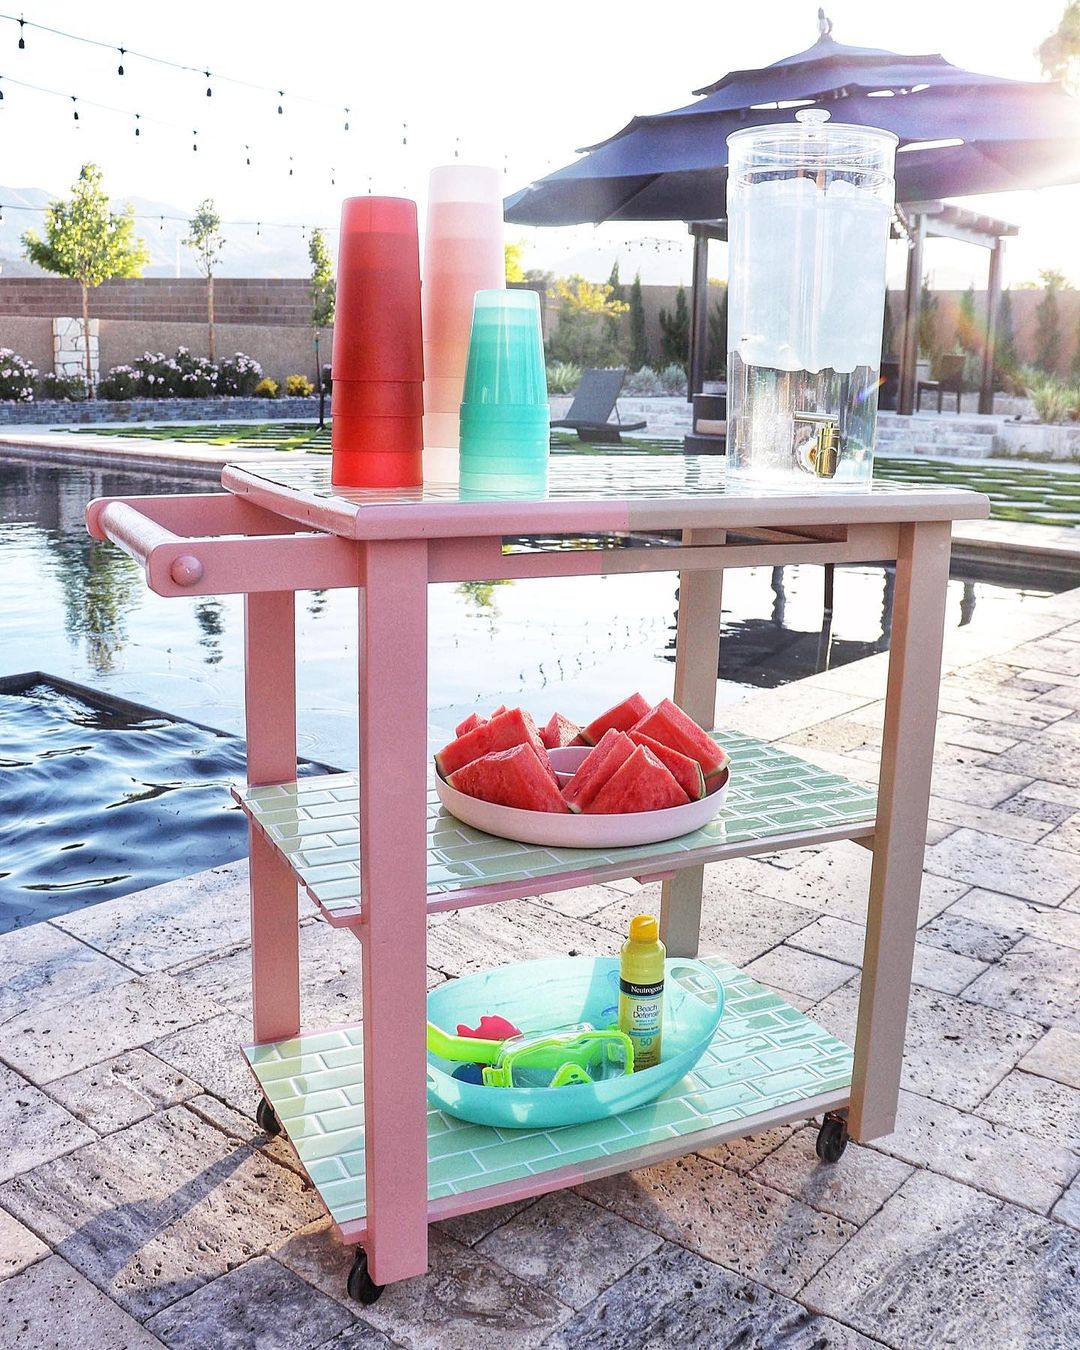 Poolside Homemade Bar Cart. Photo by Instagram user @darling4foxes